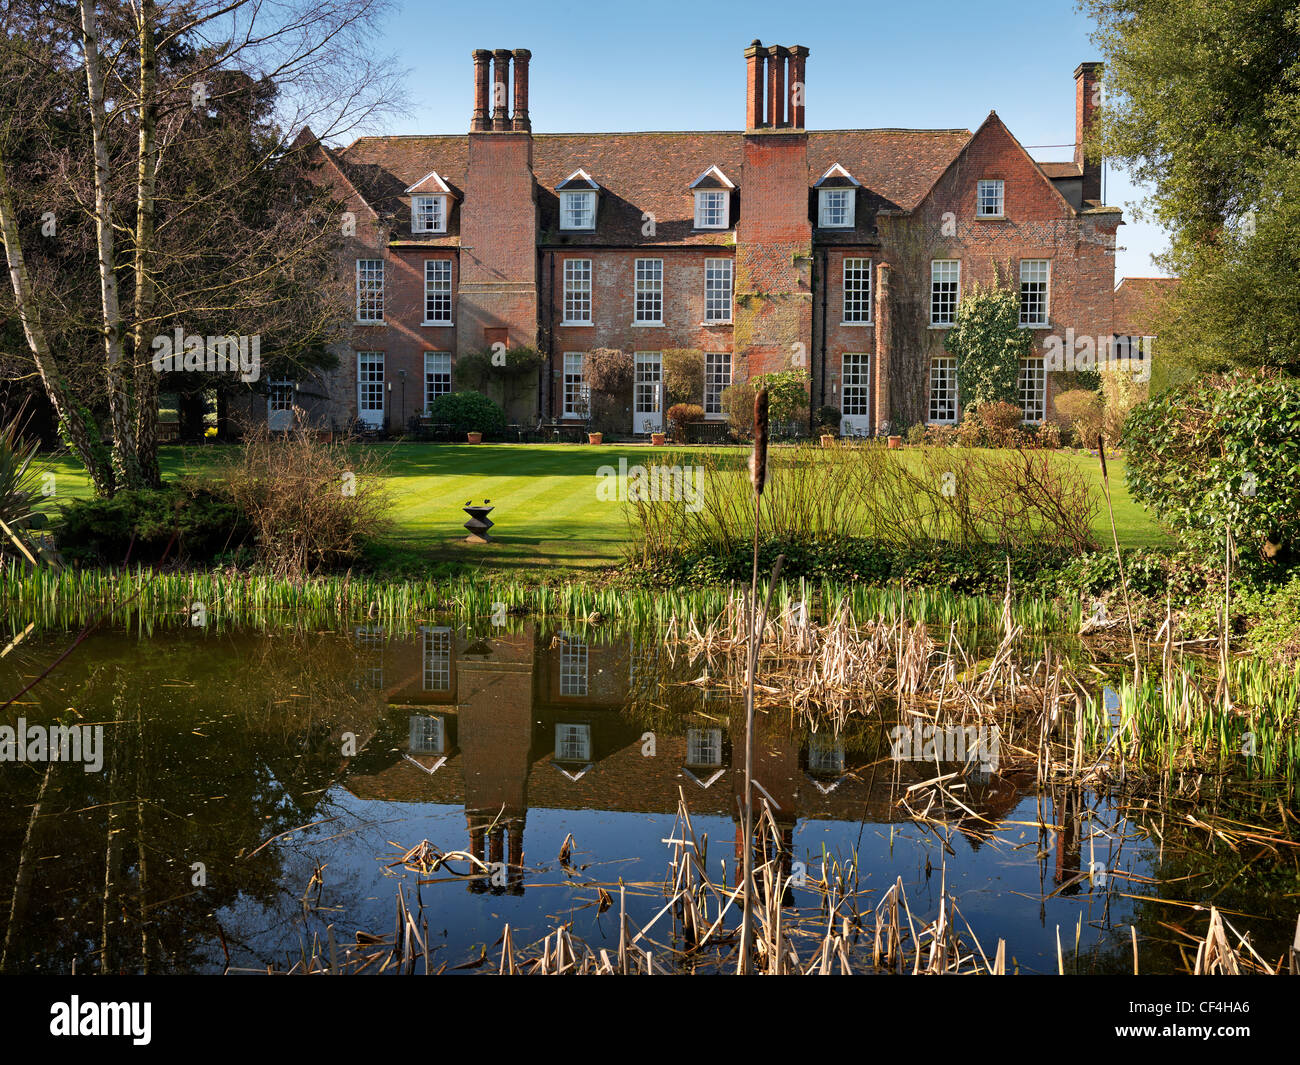 The rear of Hintlesham Hall, a stunning 16th century Elizabethan Grade I listed country house hotel, reflected in a pond in the Stock Photo